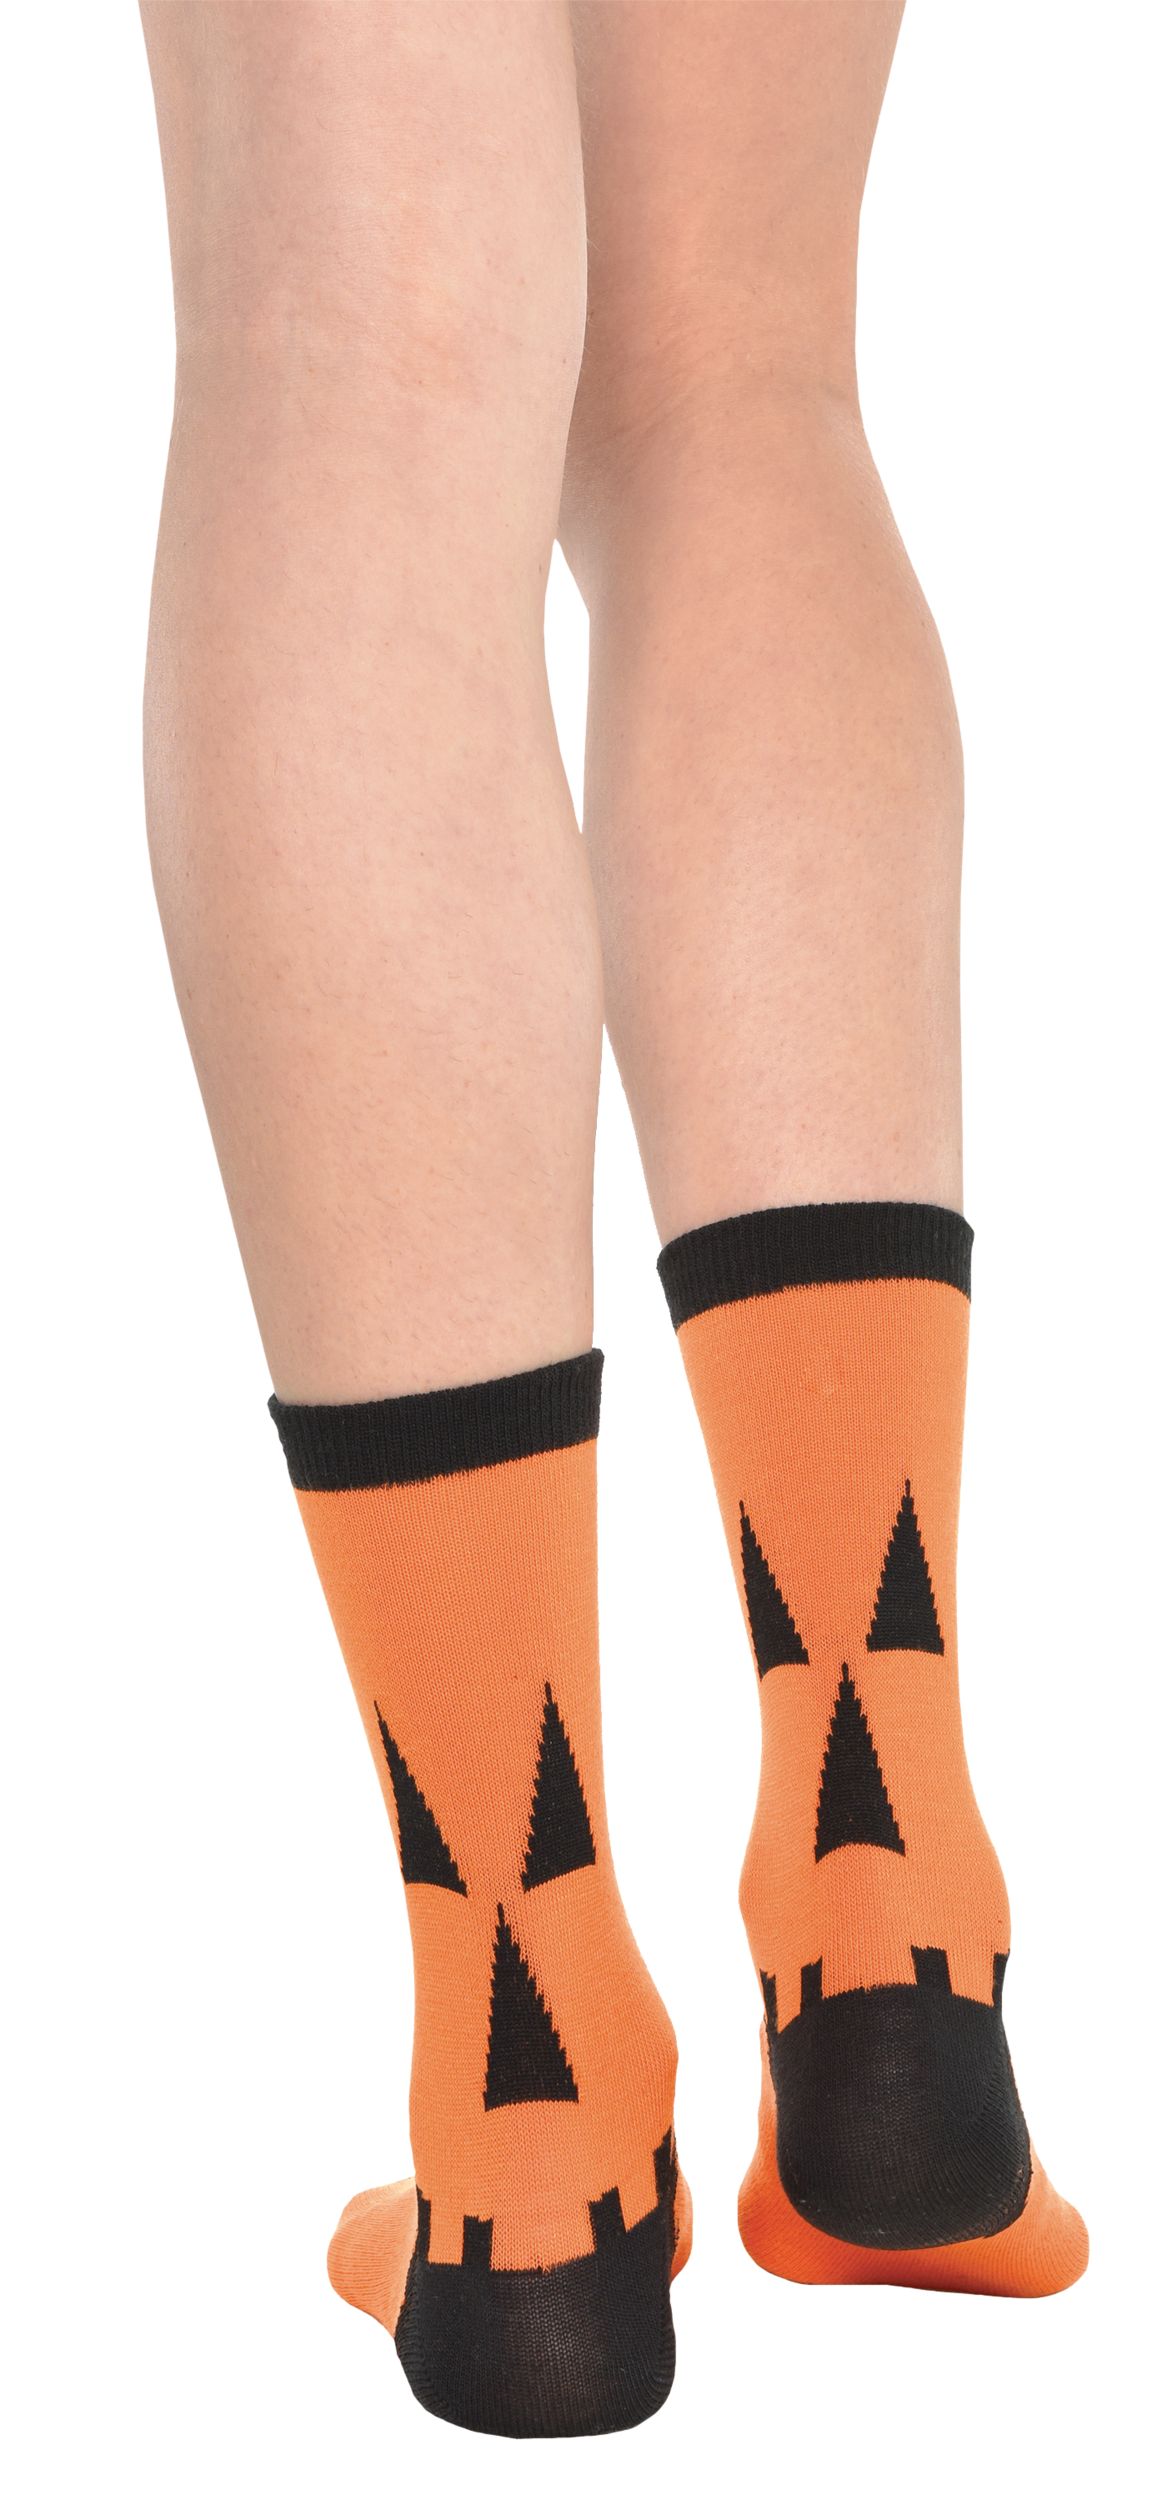 Seamless Party Tights, Comfortable Leggings for Halloween, Adult